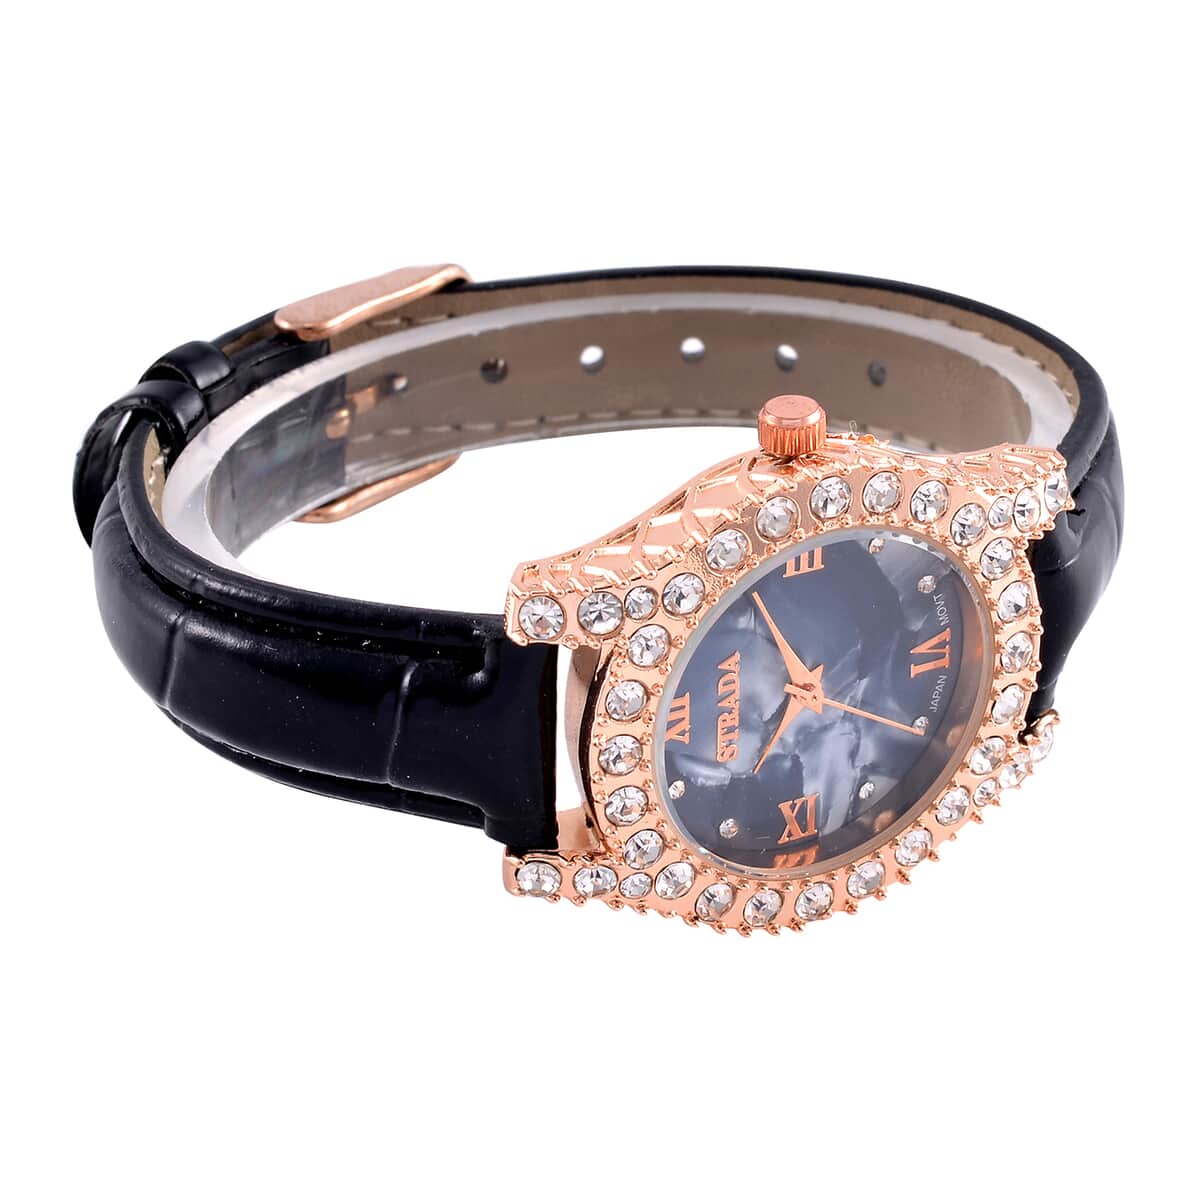 Strada Austrian Crystal Japanese Movement Watch in Rosetone with Black Faux Leather Strap (31.24 mm) (6.5-7.5 Inches) image number 5